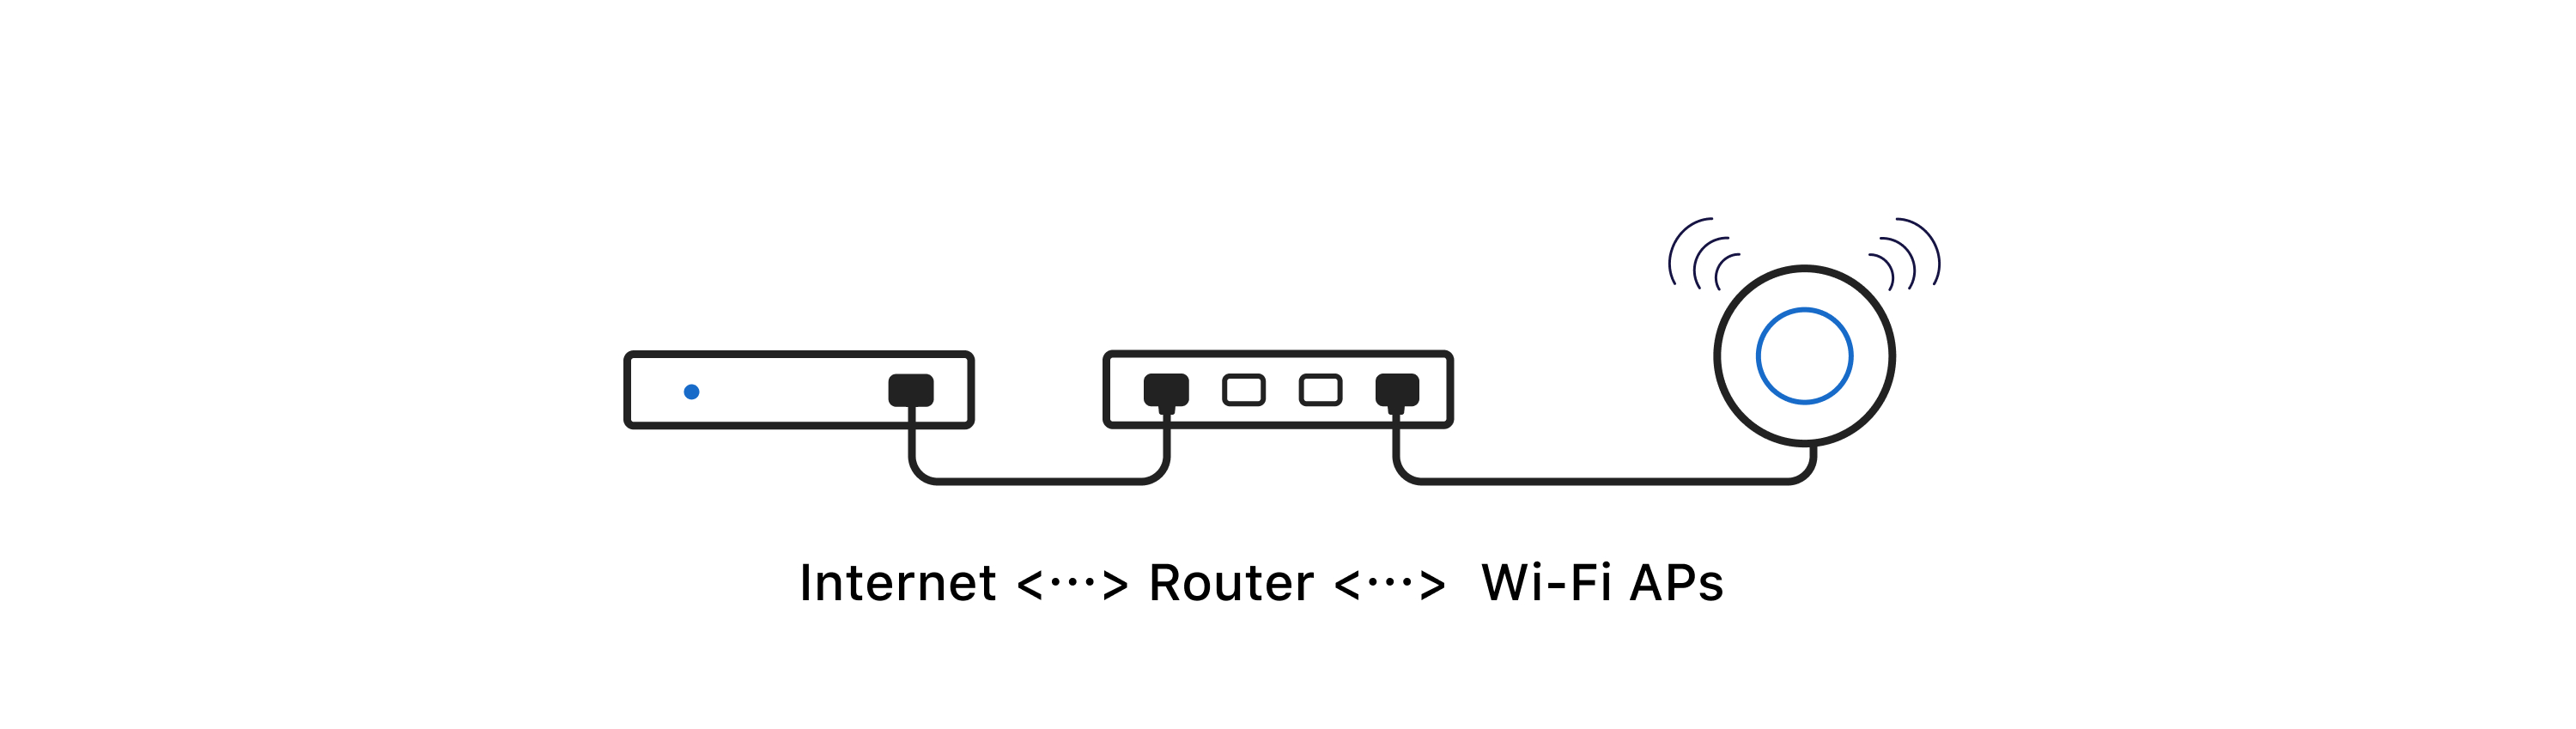 Basic Network Diagram featuring Internet, Router, and WiFi APs
